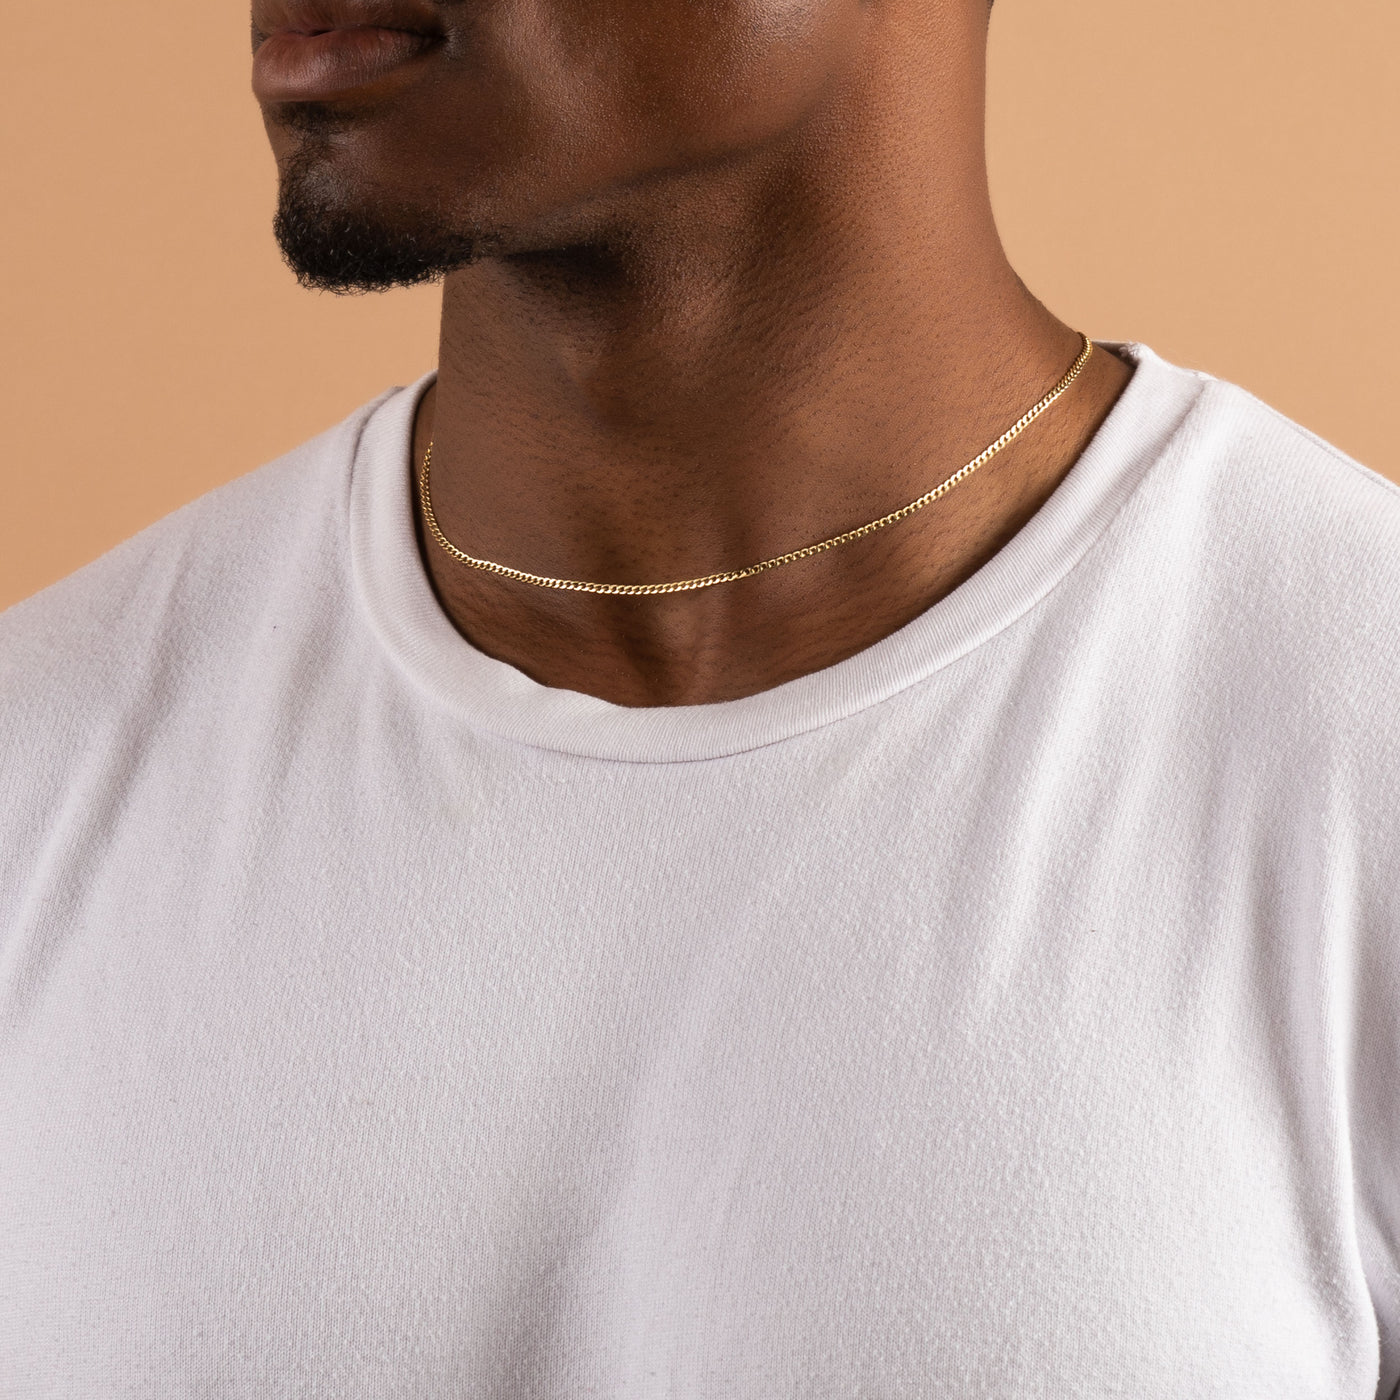 14K GOLD CURB CHAIN NECKLACE